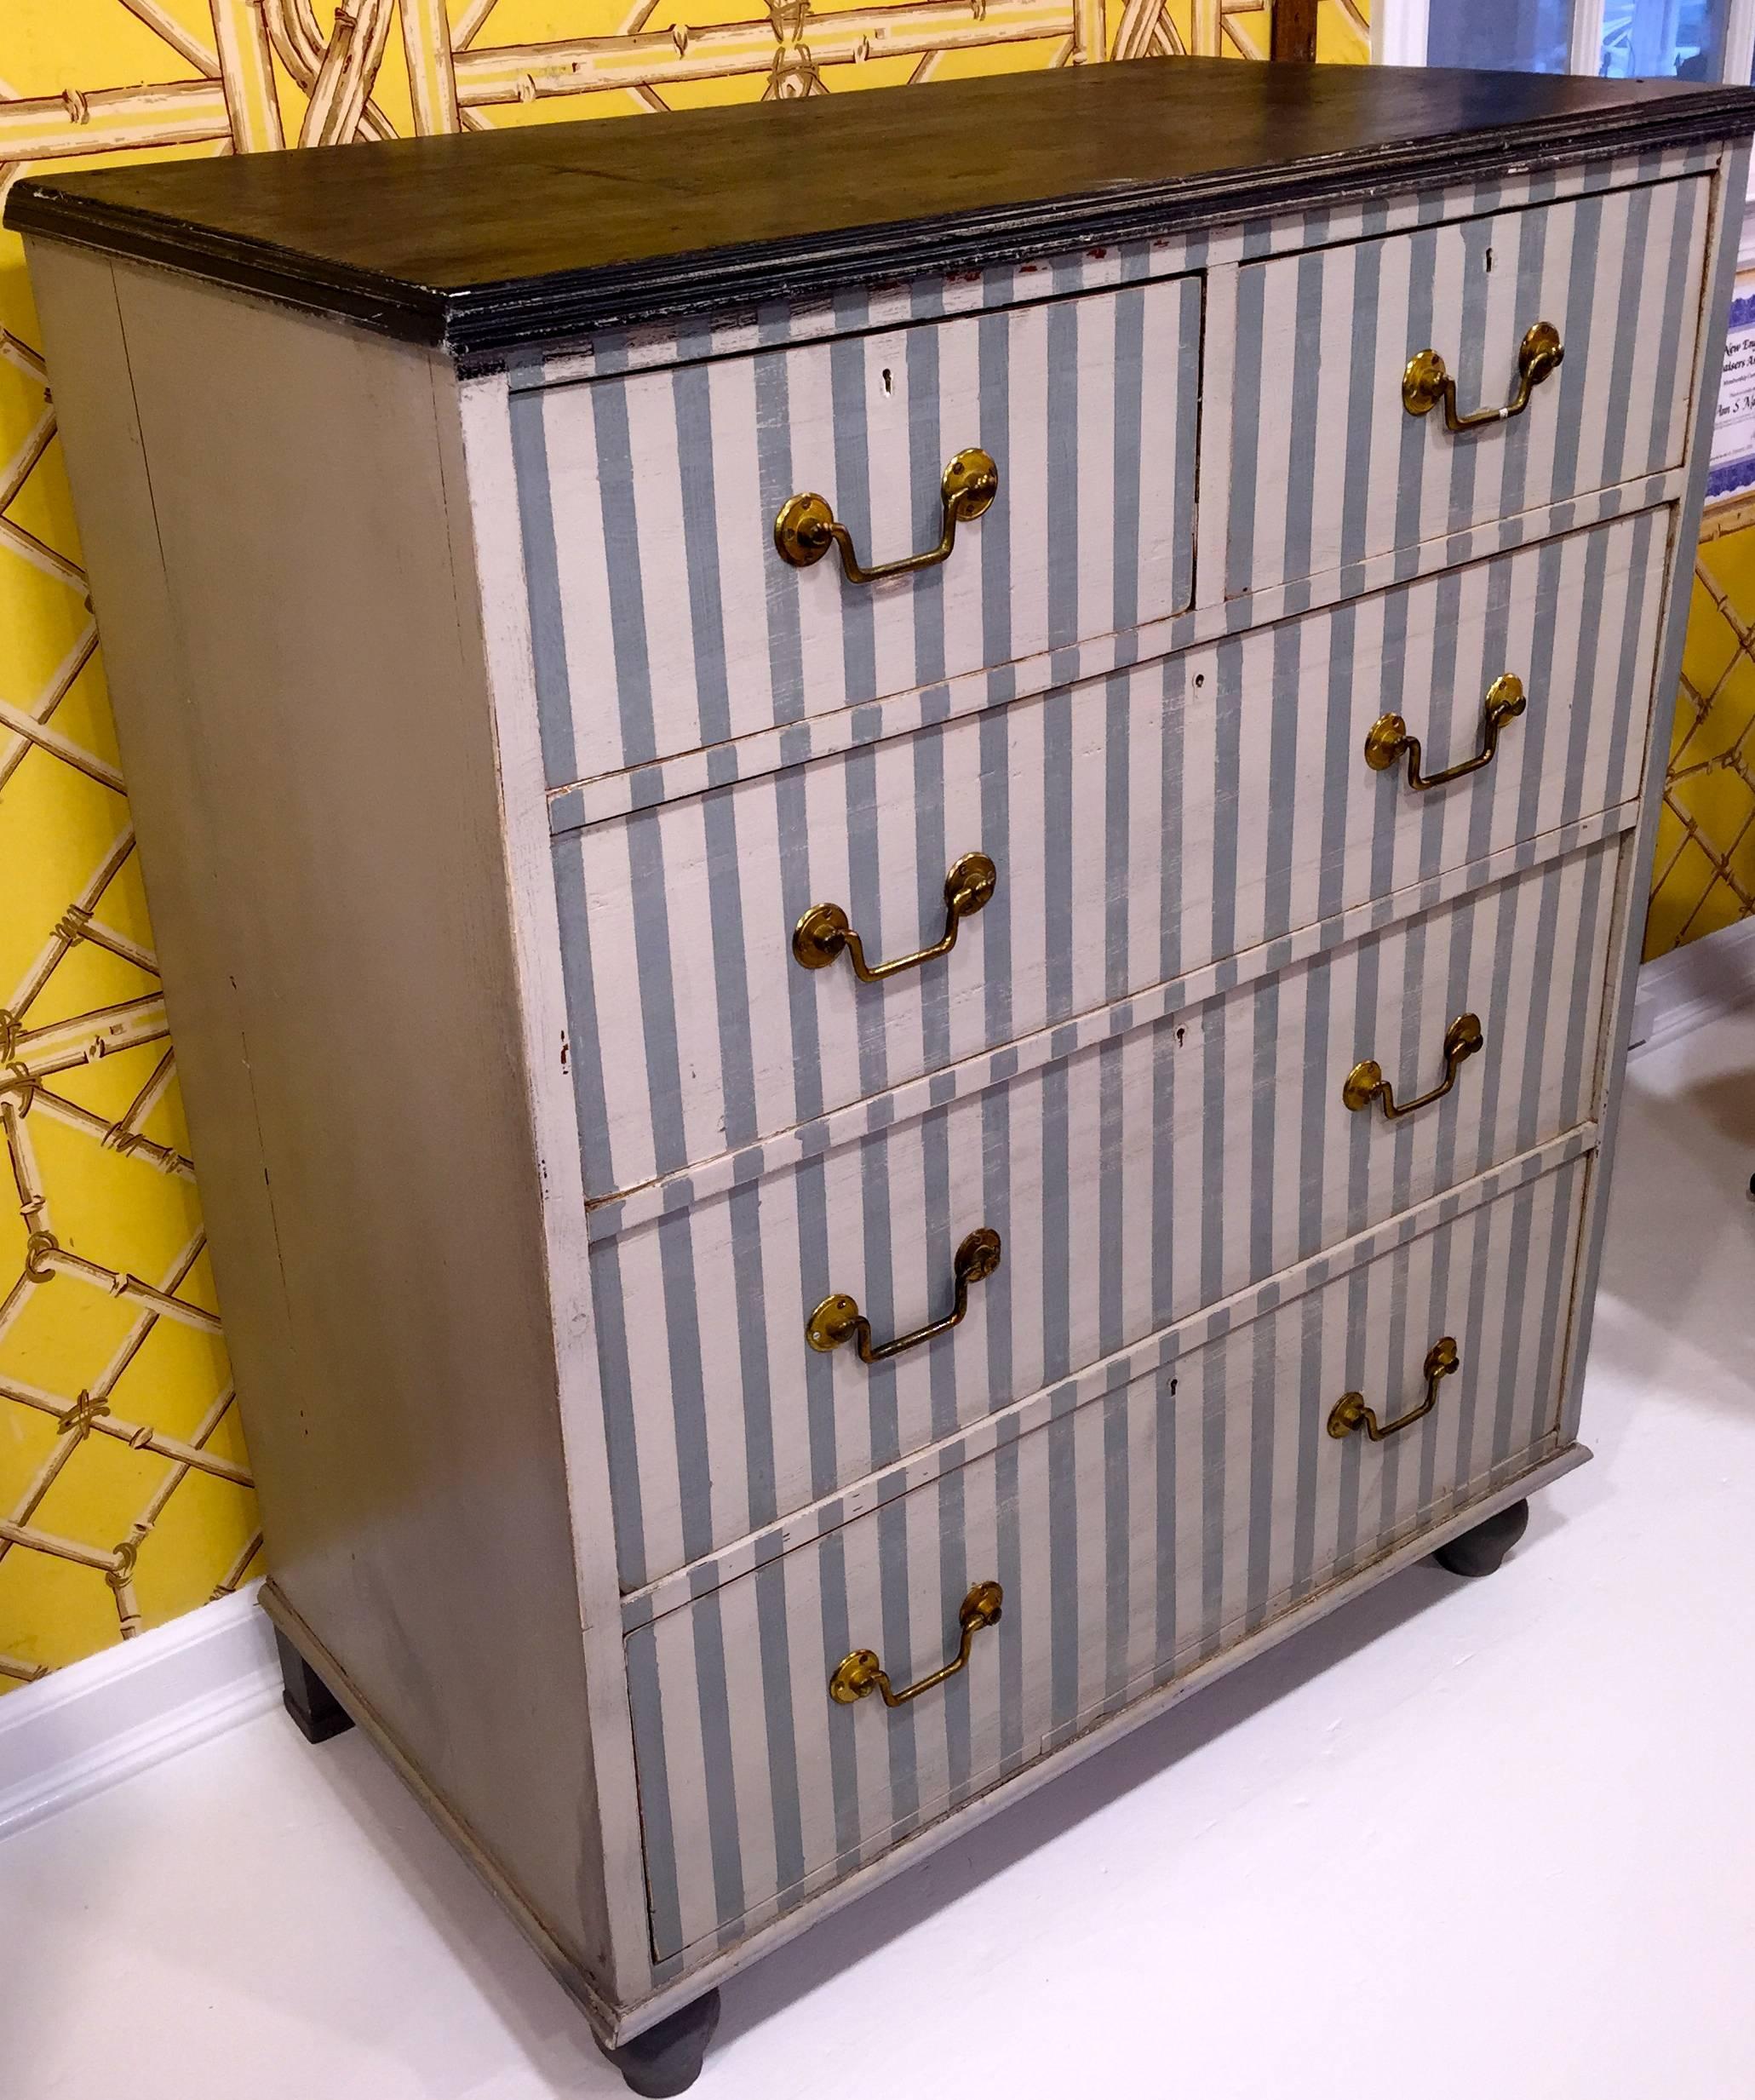 19th century English Painted Chest of Drawers with Light Blue Strips 
having a black painted top with period brass handles
Very smart